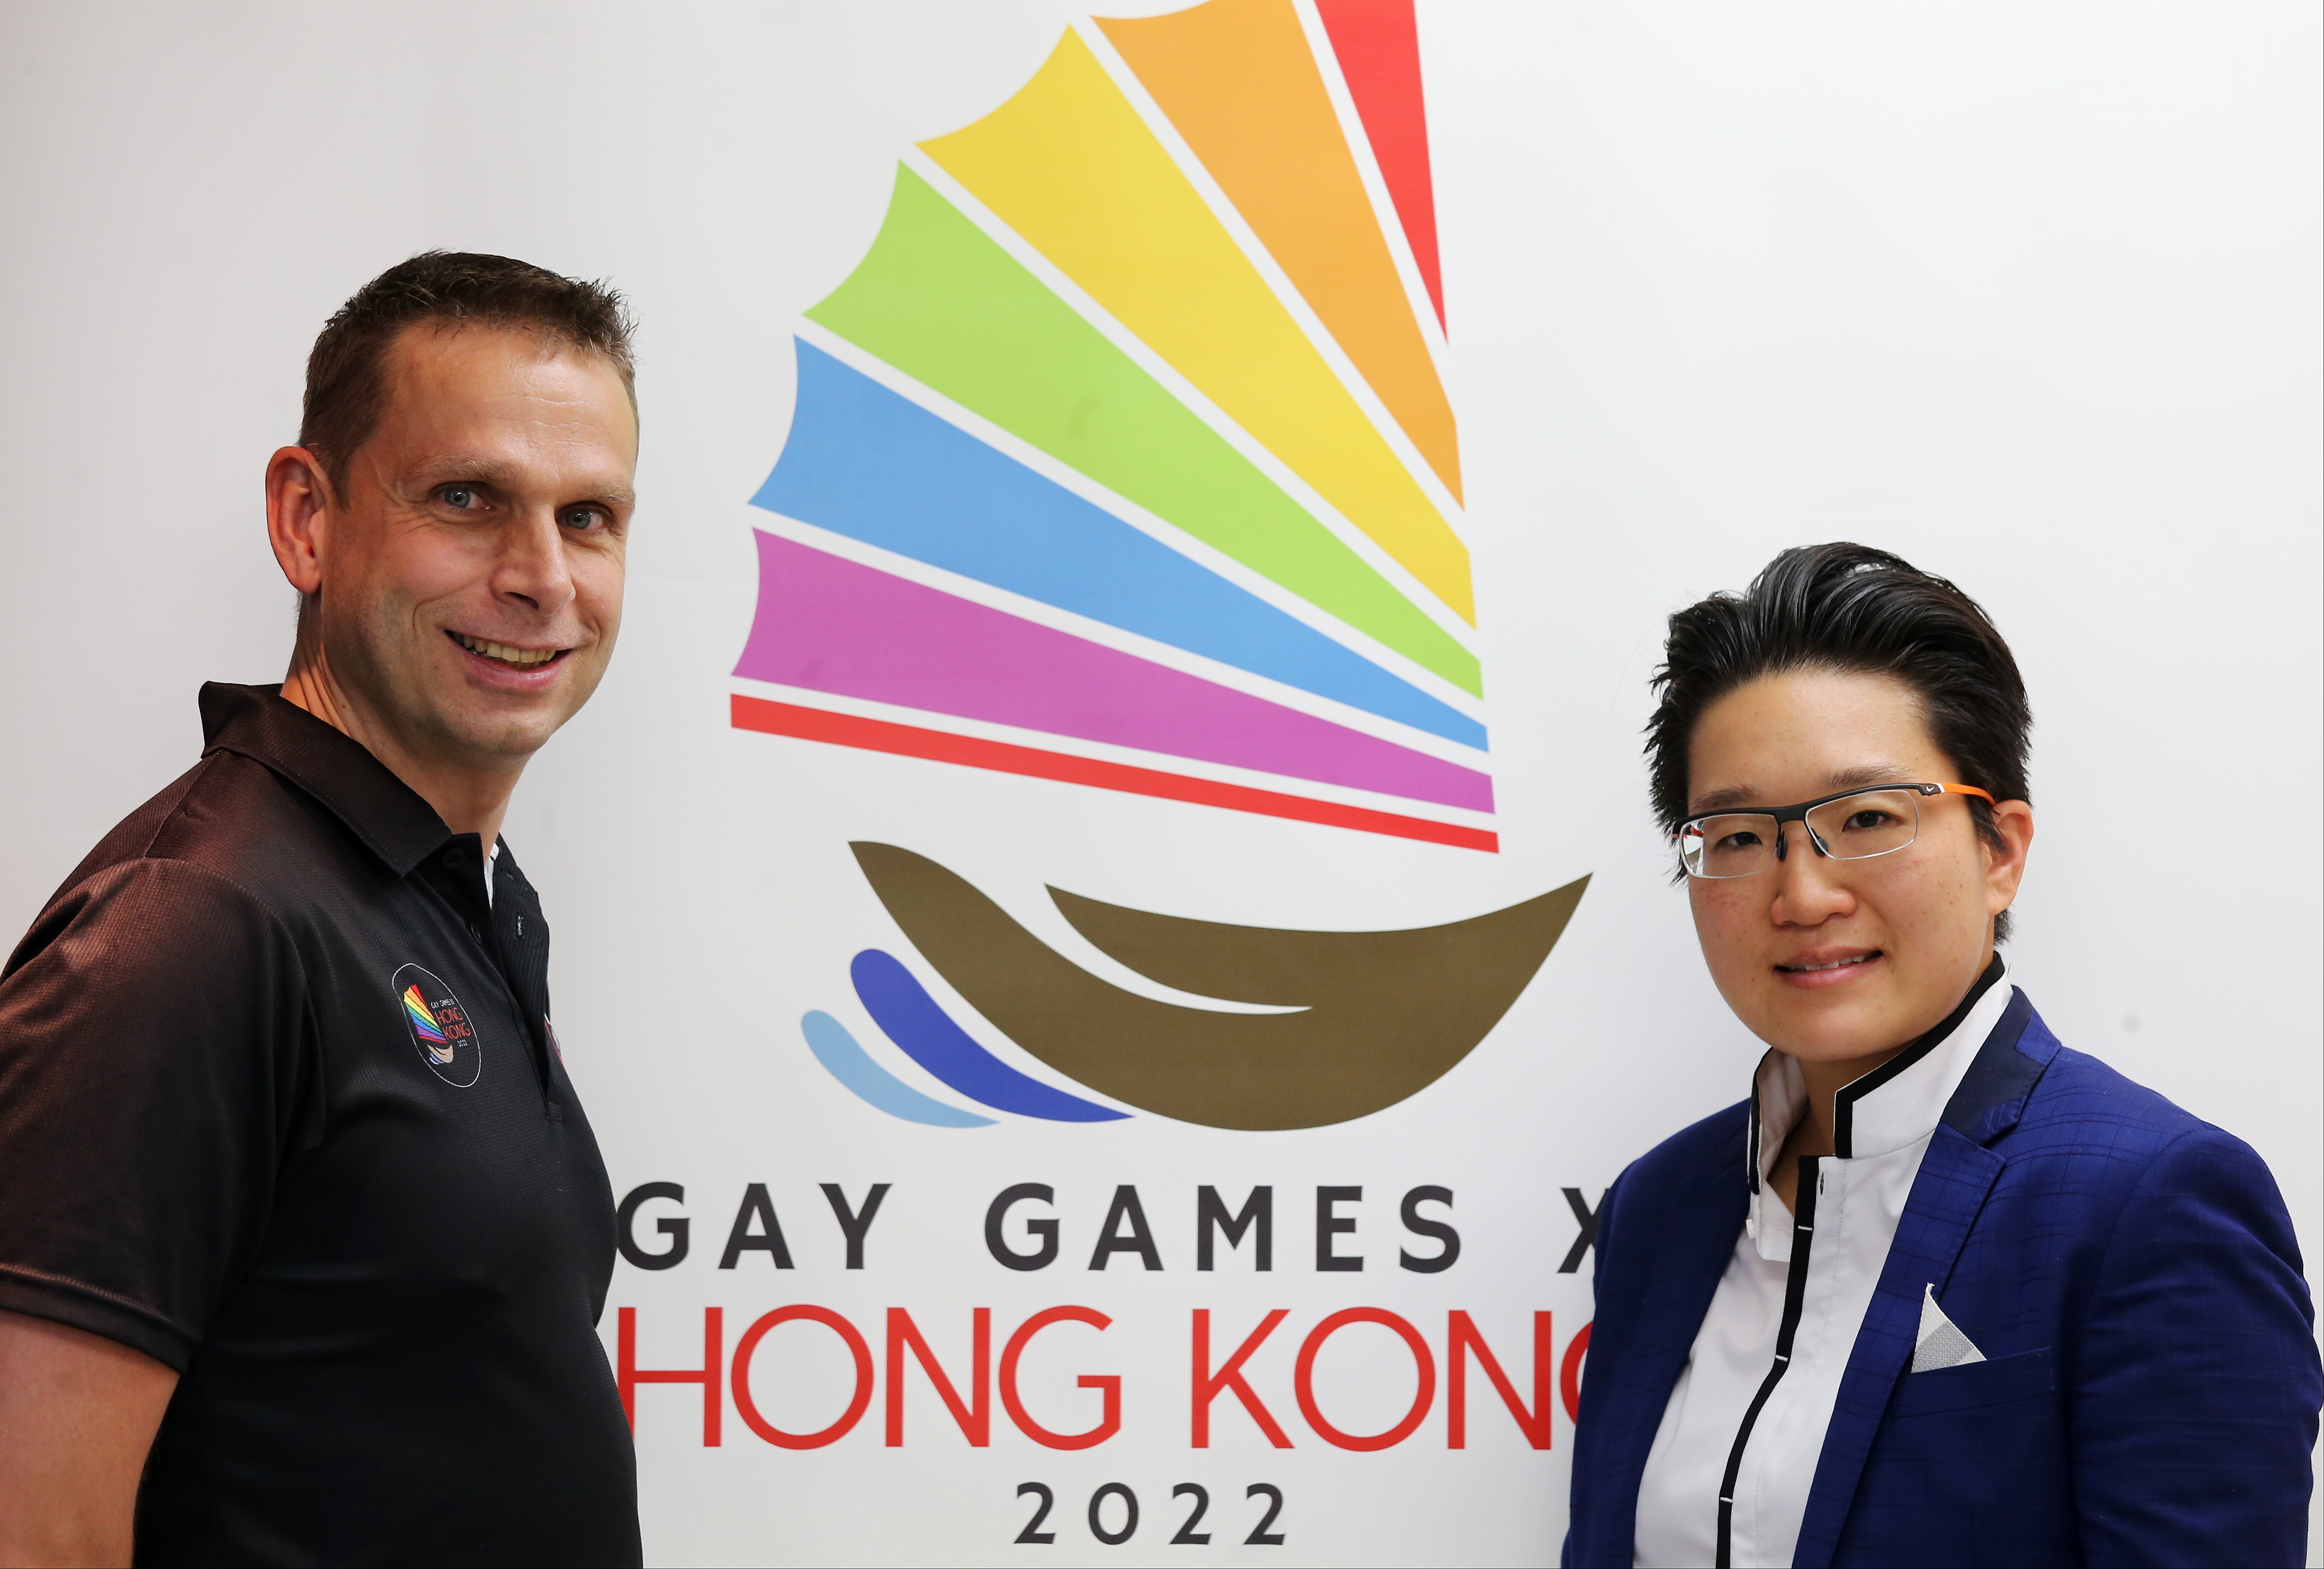 Dennis Philipse went from being picked last in gym class in his native Holland to bringing the Gay Games to Asia for the first time